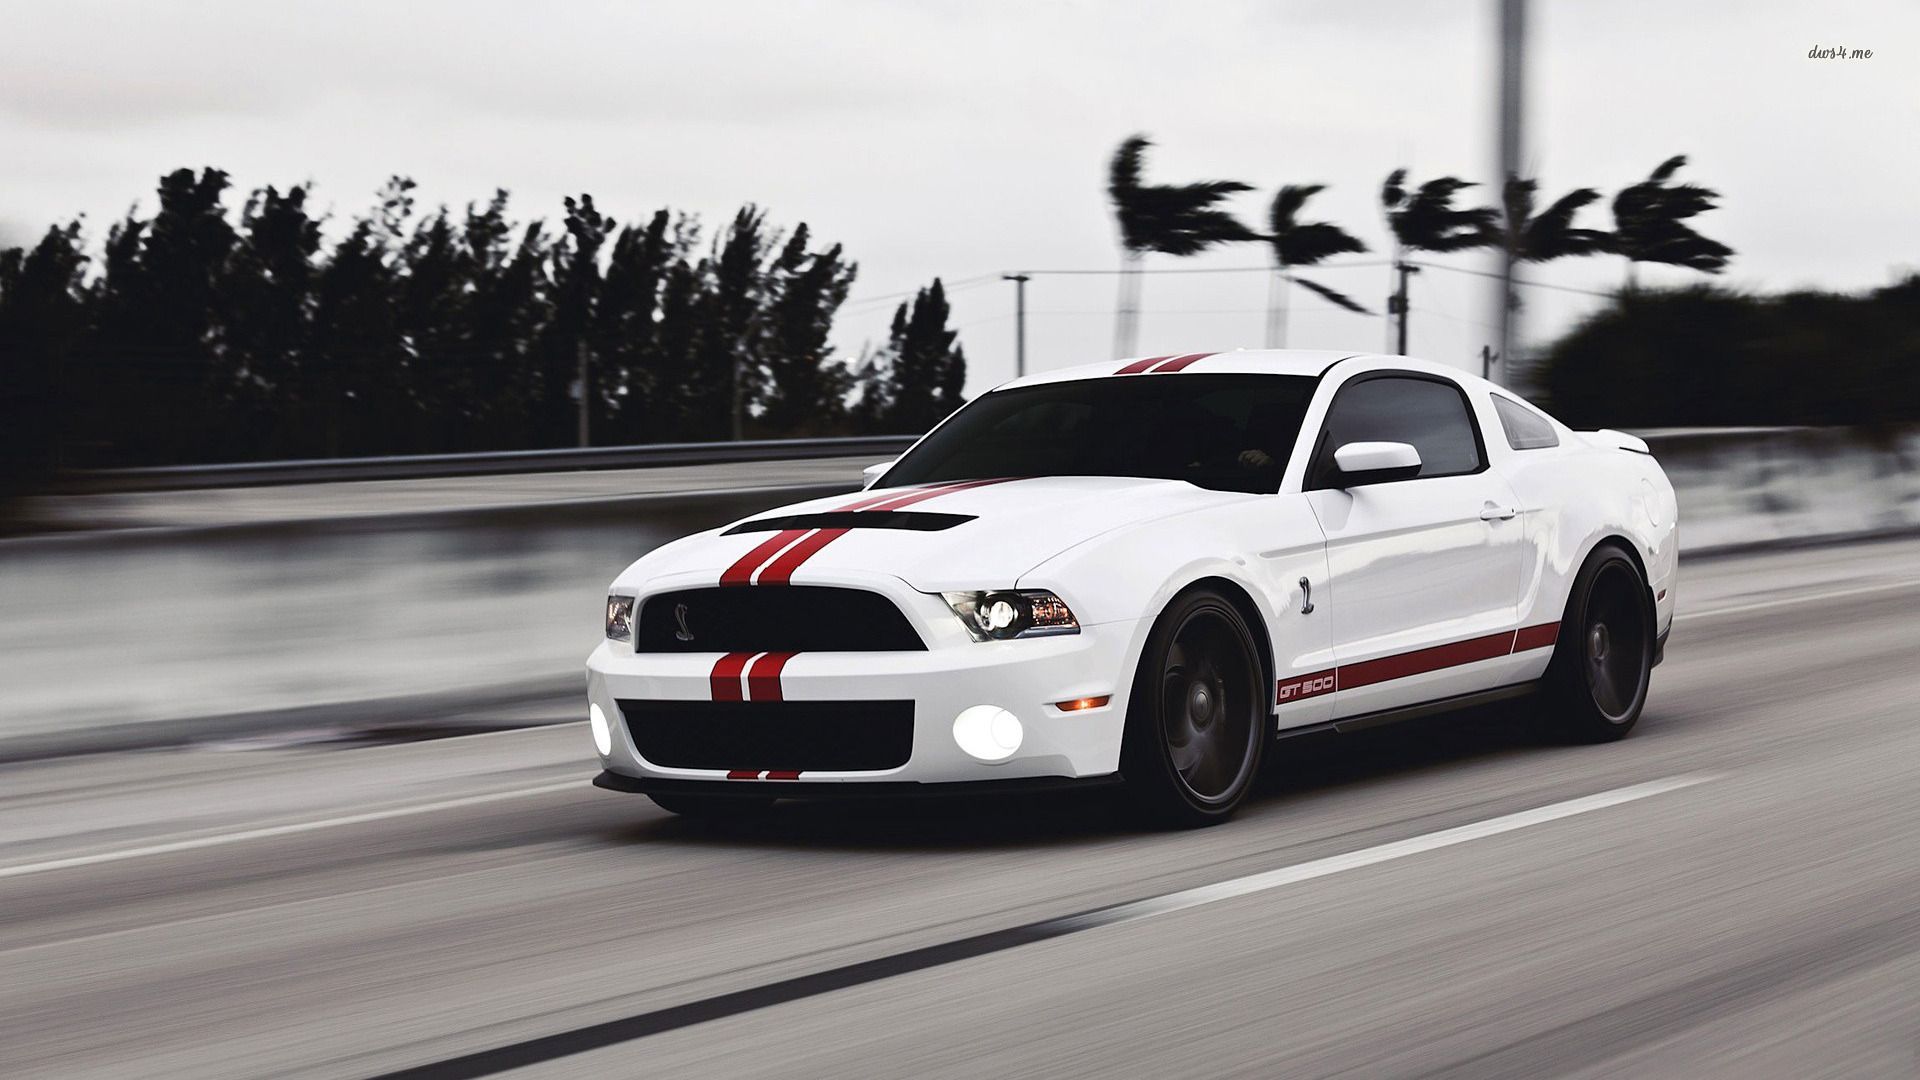 Ford Shelby Mustang GT500 wallpaper - Car wallpapers - #3792